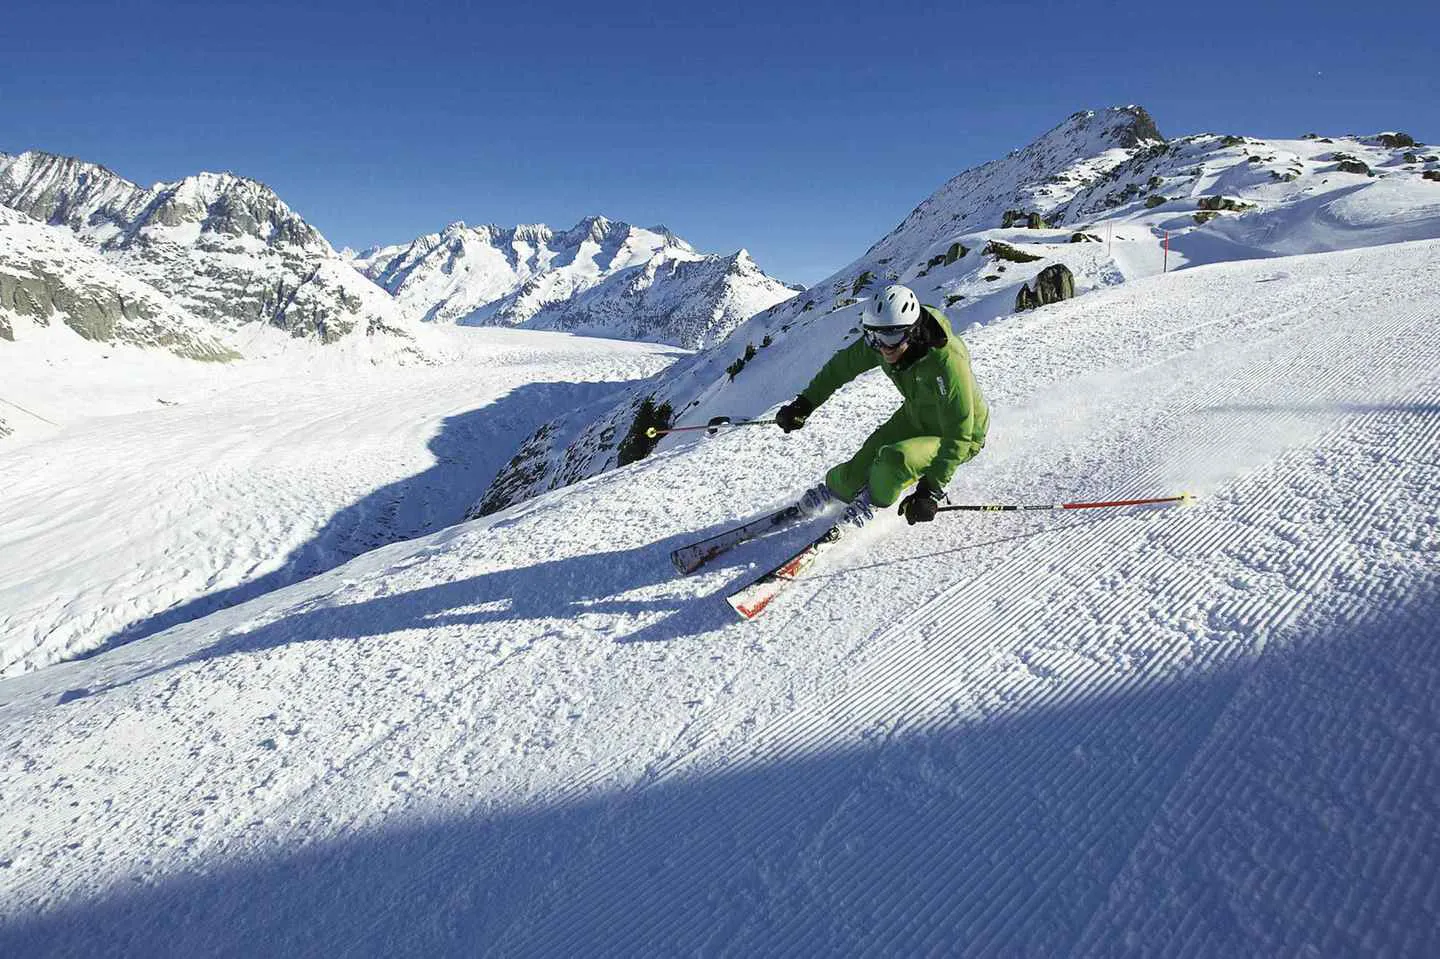 Skiing in the Aletsch arena